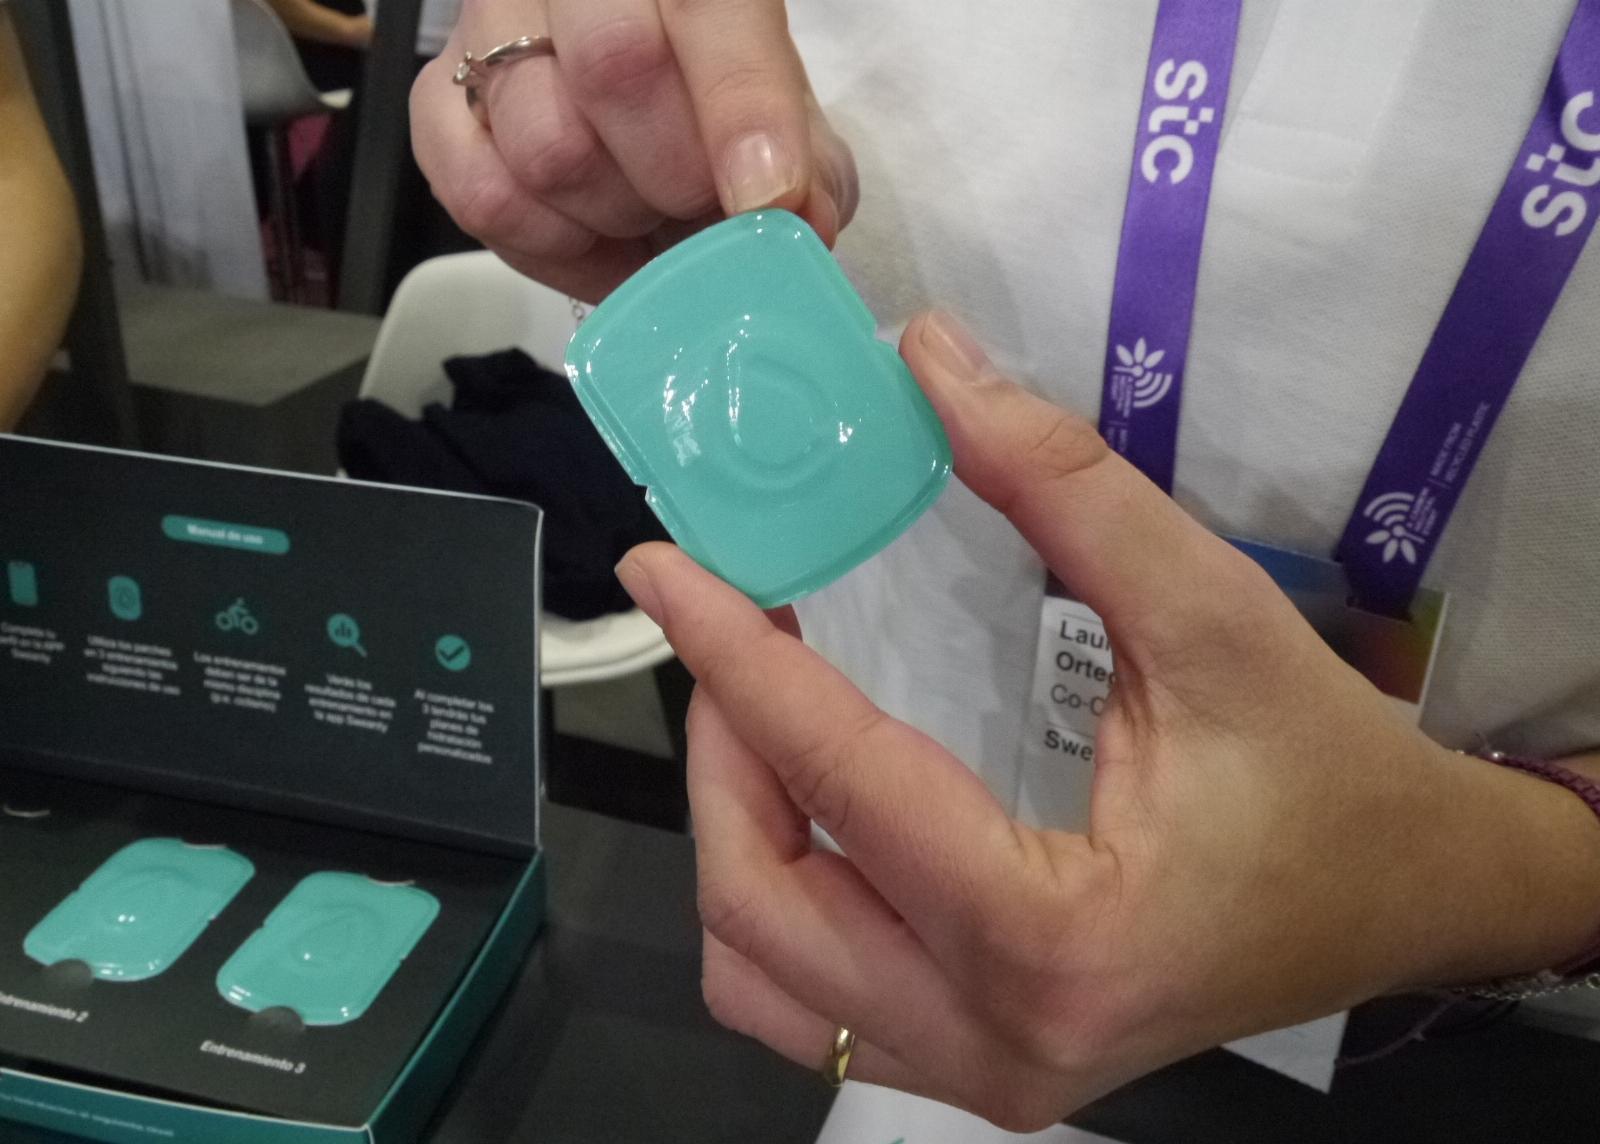 Sweanty’s wearable patch for athletes tracks salt loss to help them hydrate